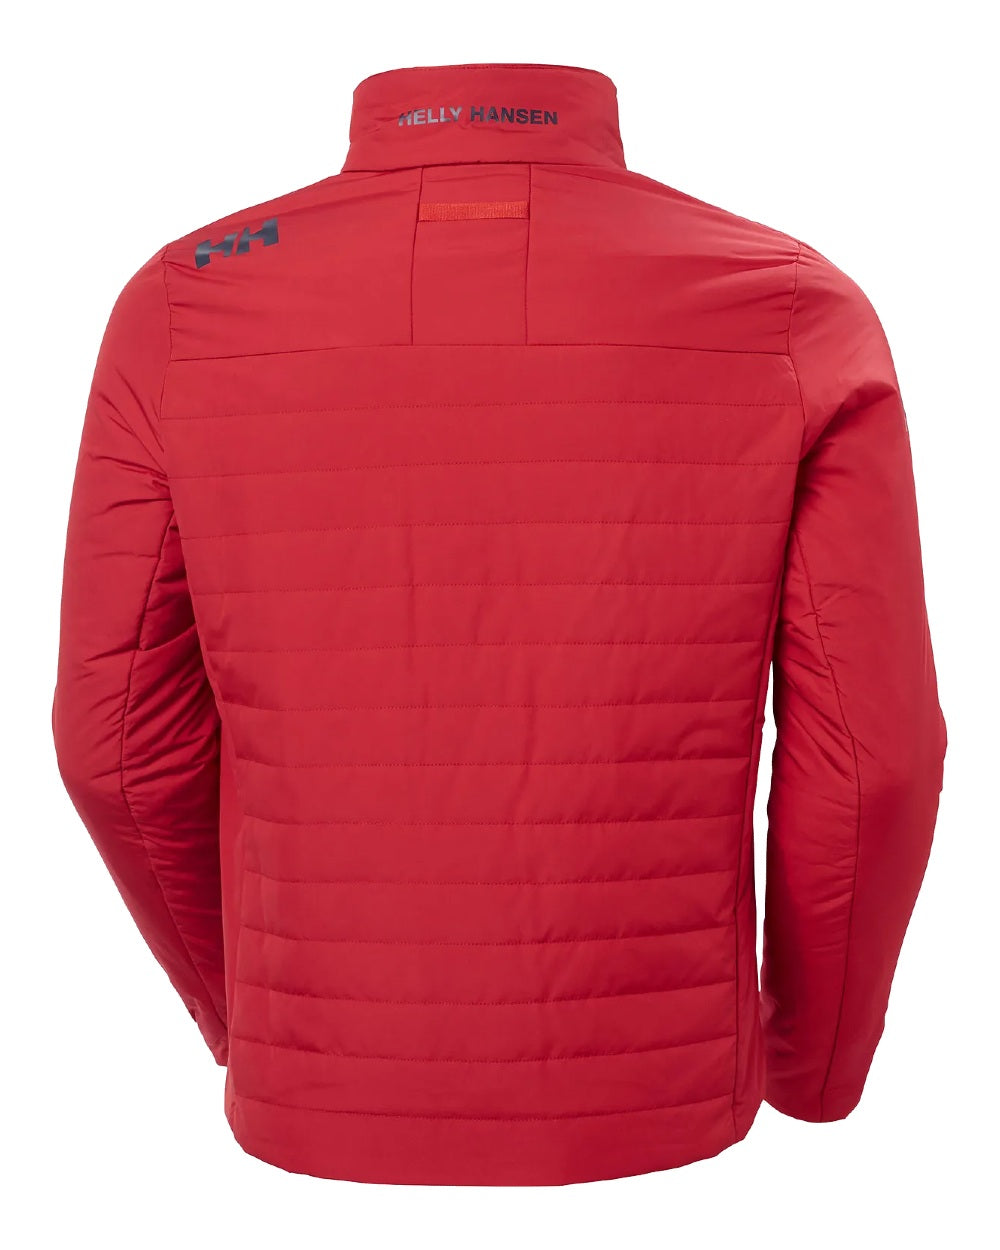 Helly Hansen Mens Crew Insulated Sailing Jacket 2.0 in Red 